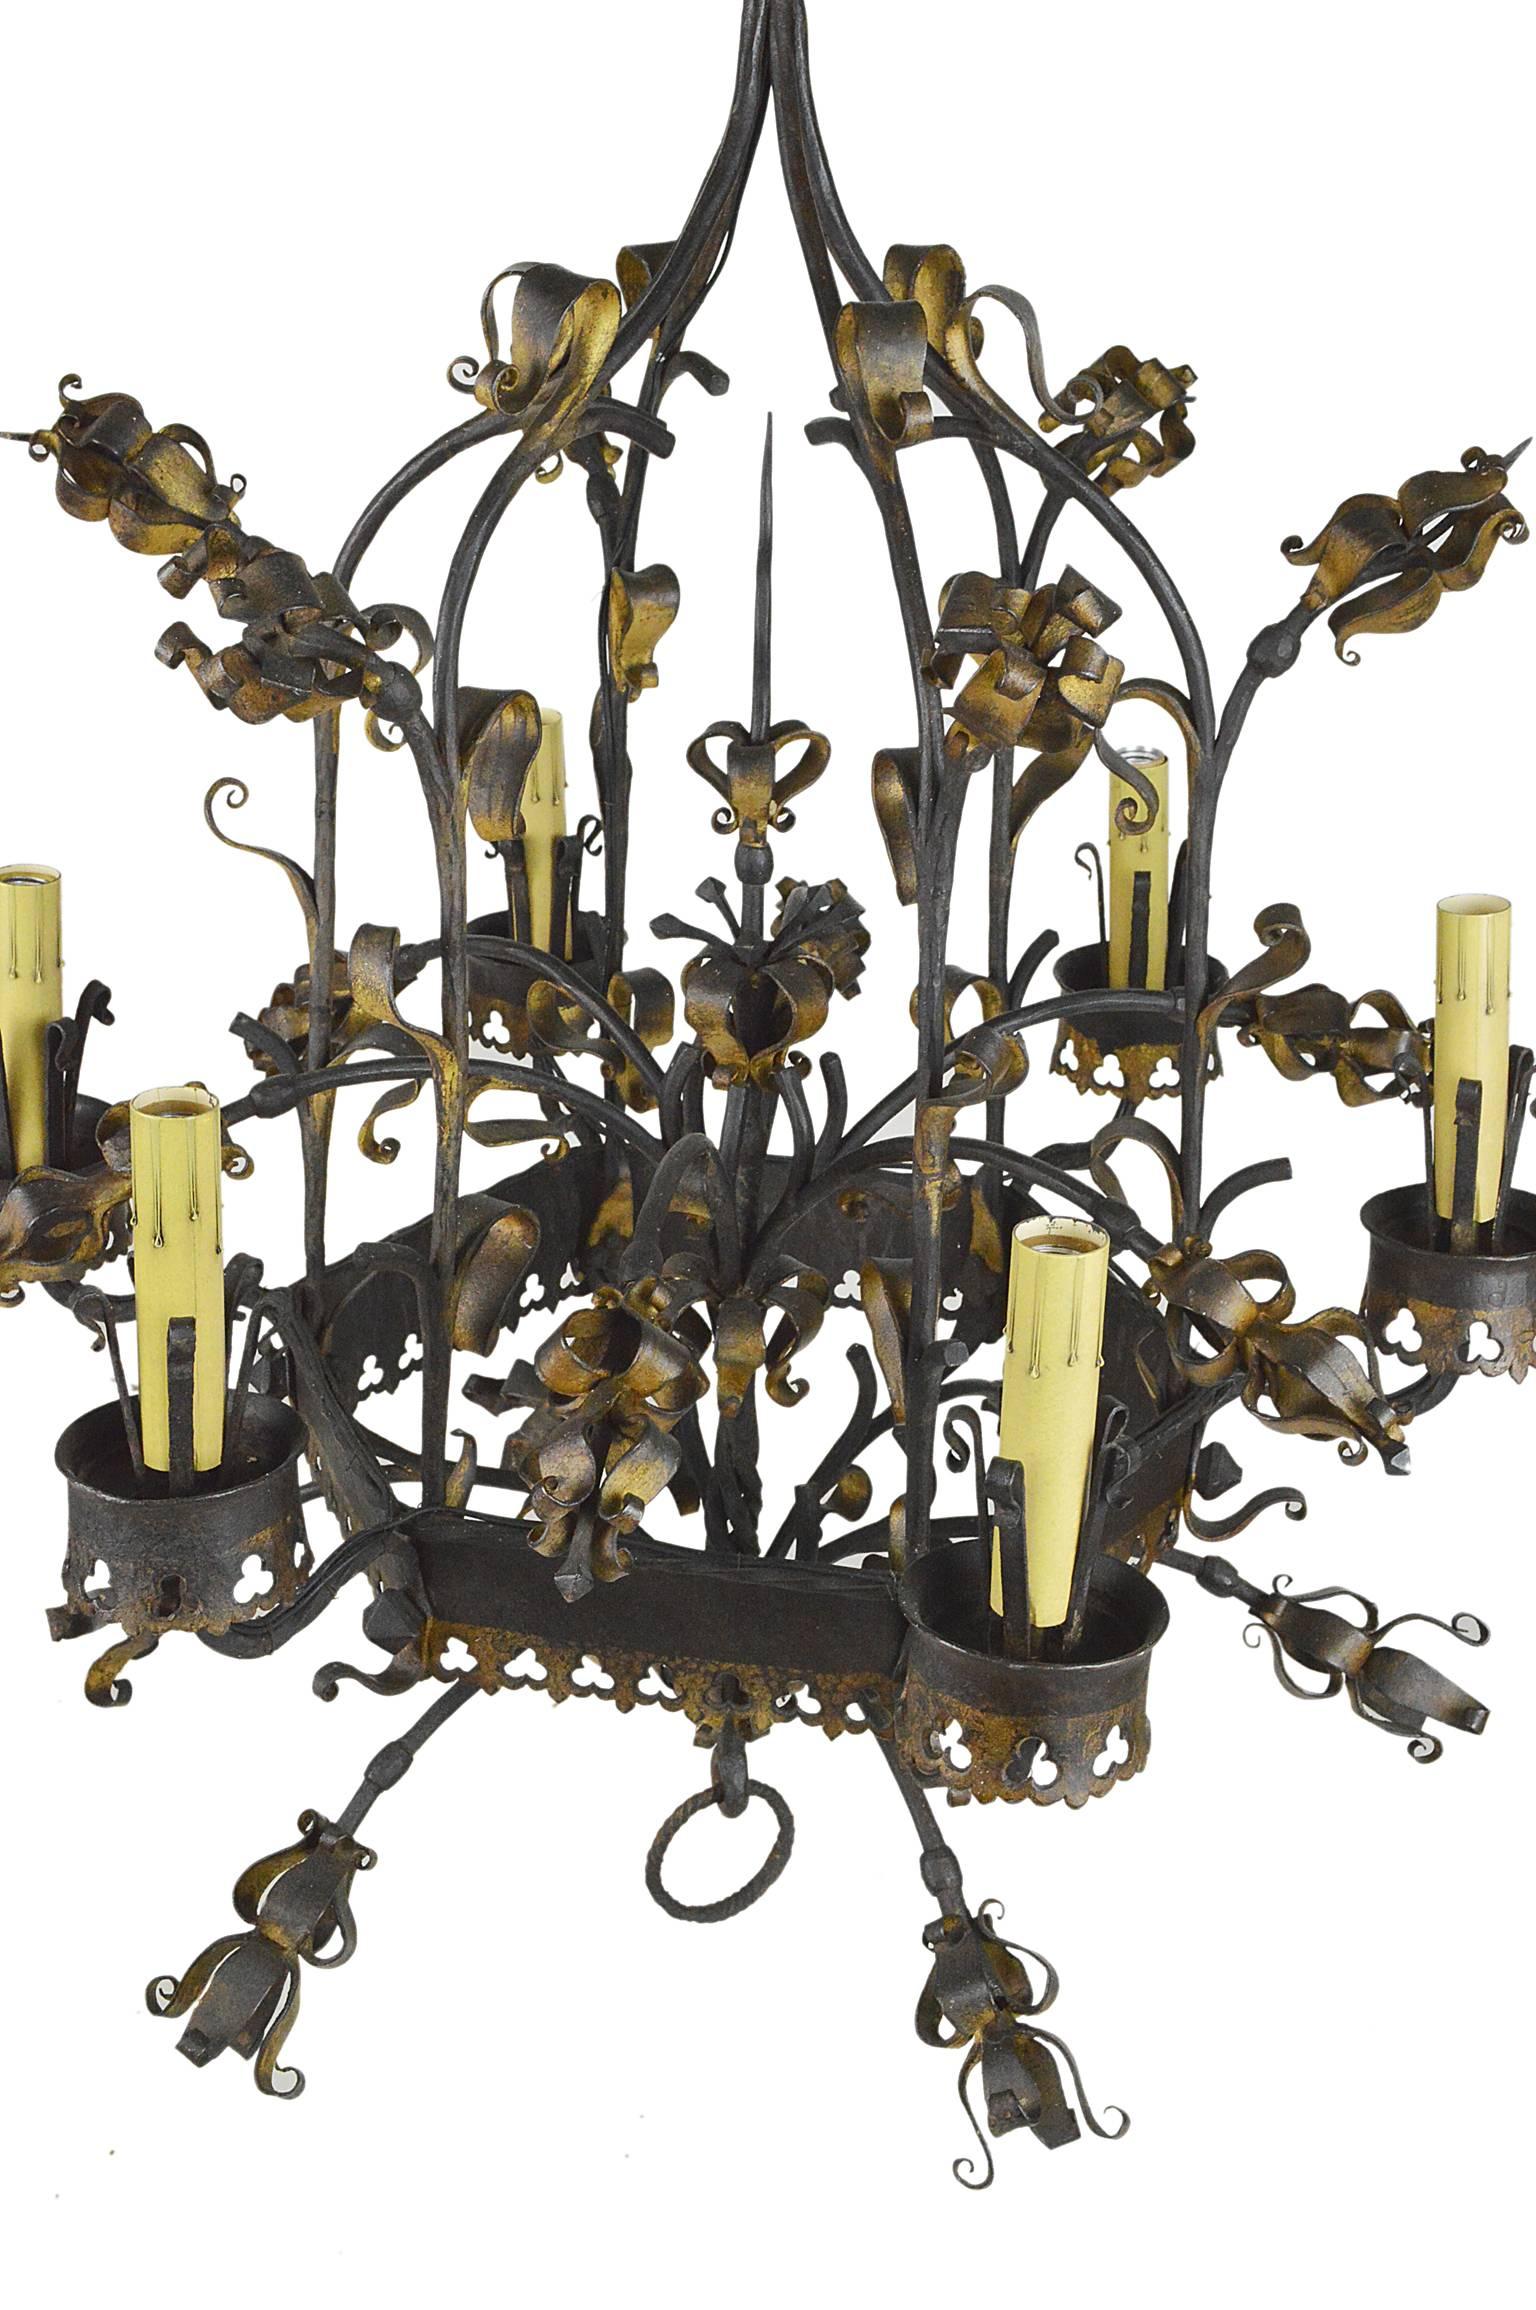 A fine 19th century French Renaissance style wrought iron and gilt six light with beautiful hand-wrought and hand-forged work throughout. Having original patina, completely cleaned and re-wired.